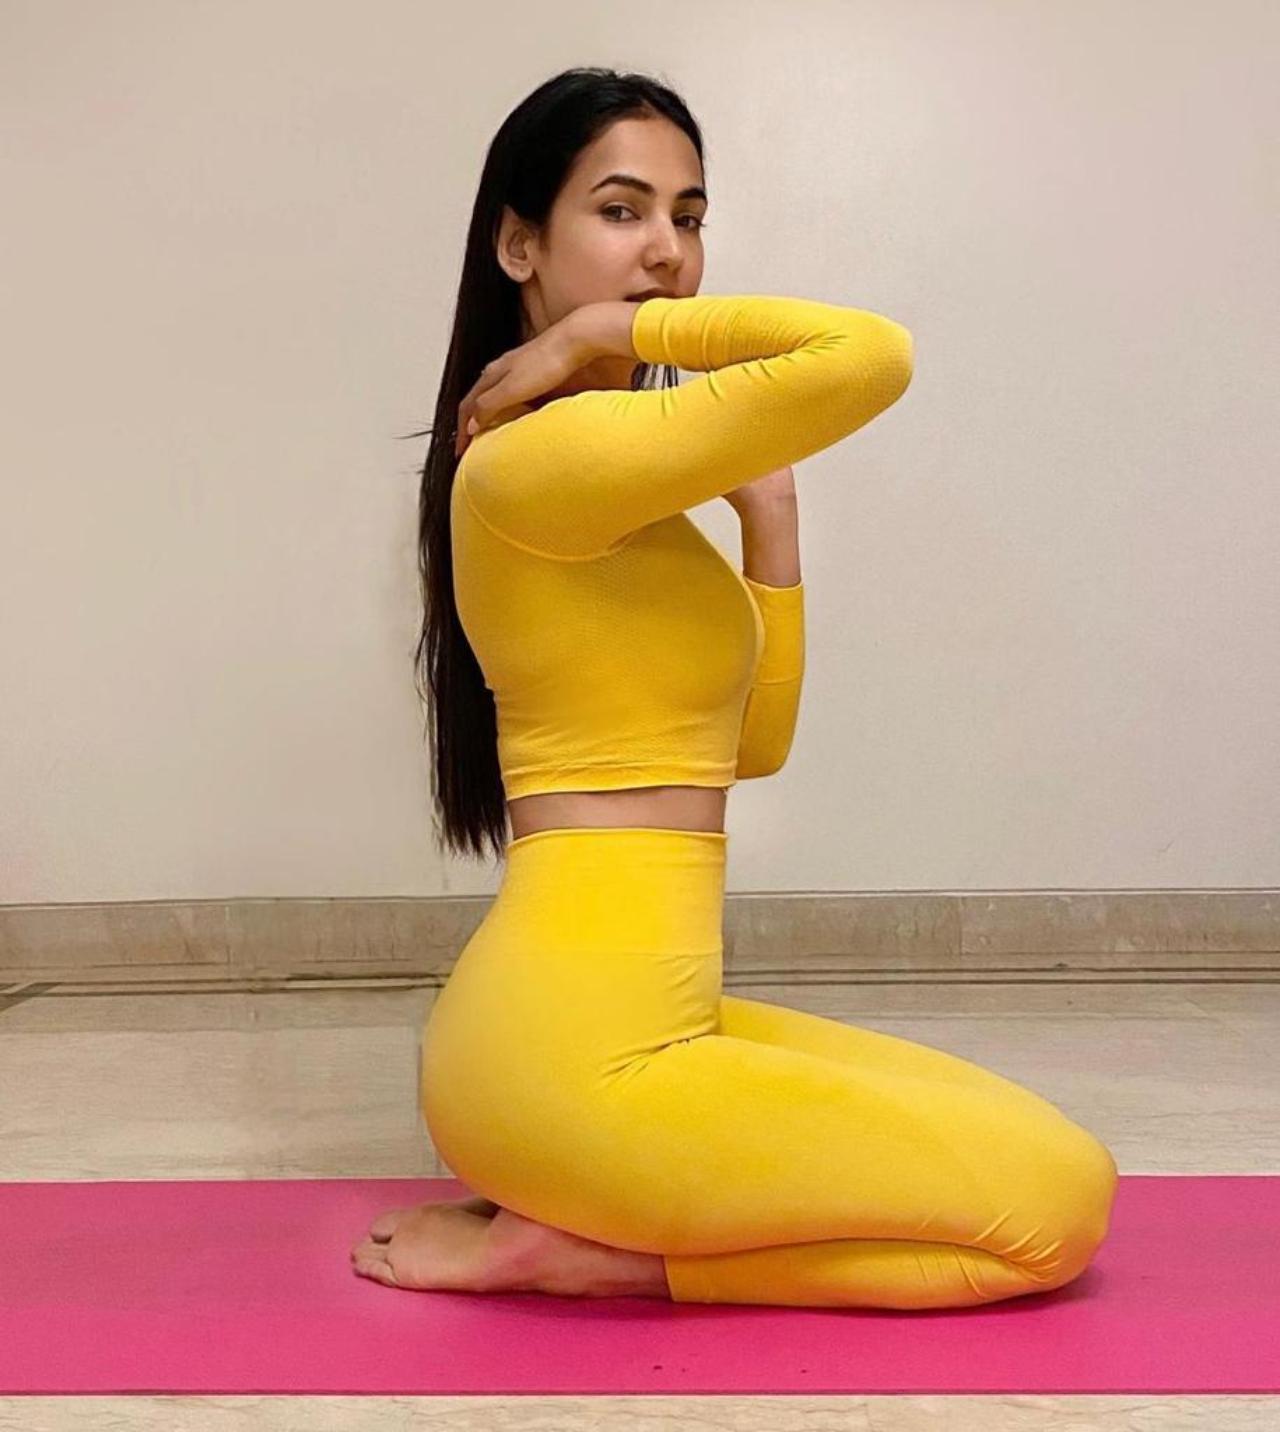 Sonal’s yellow athleisure look gives us the confidence to go in for bold colours even for workout sessions. The actress looks really comfy and elegant in her full sleeve cropped top and tights